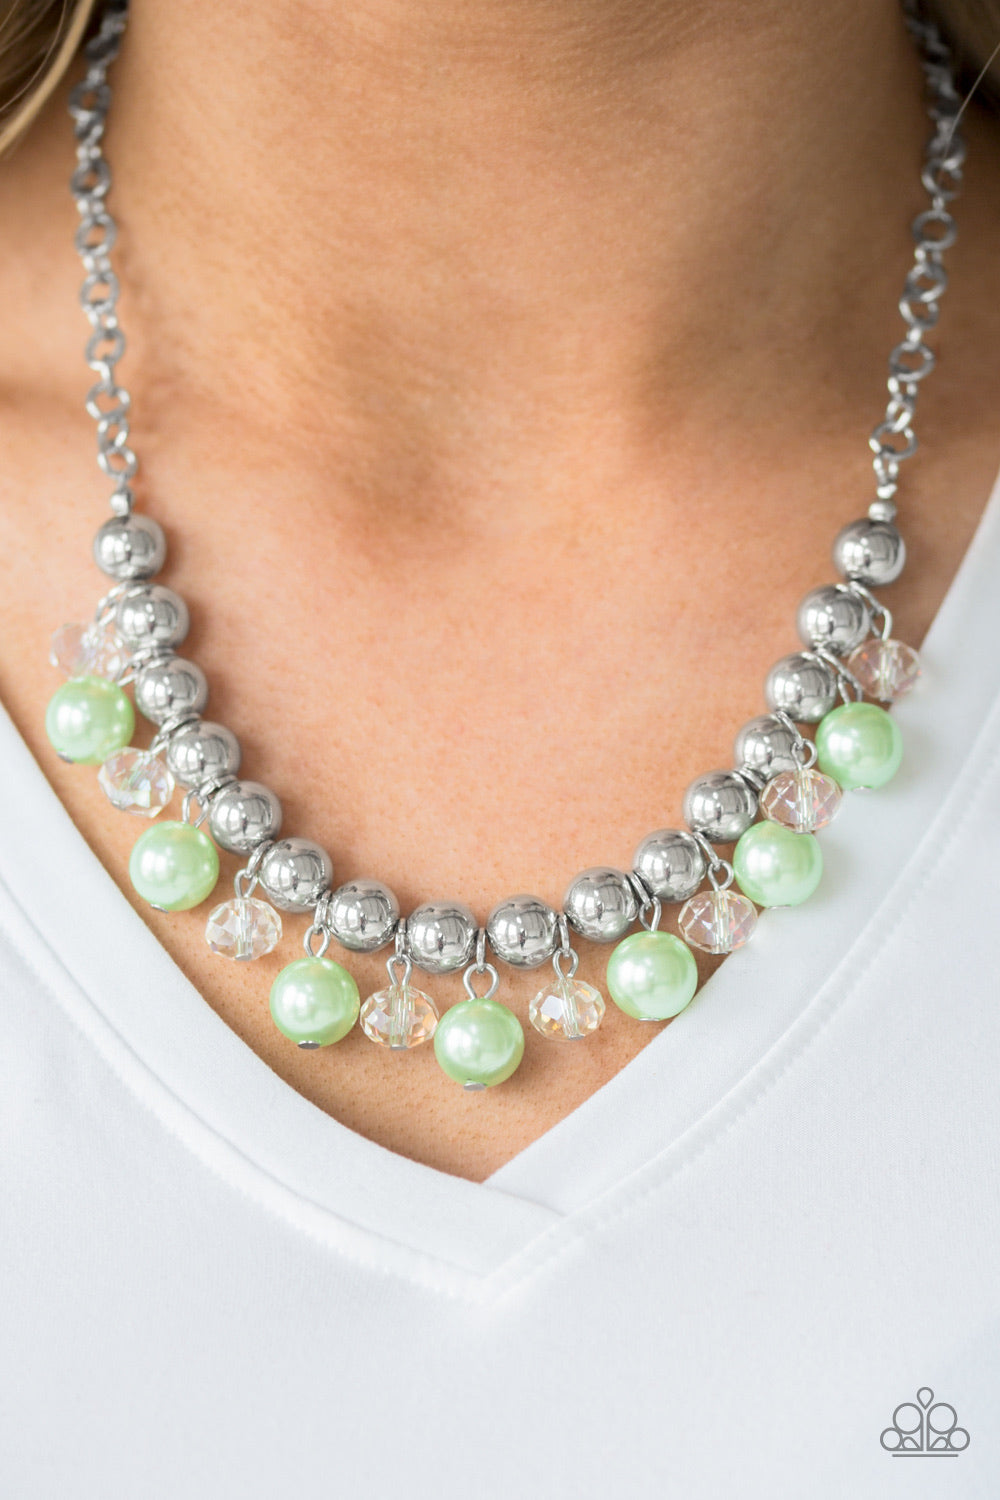 Paparazzi Accessories - Power Trip - Green Necklace - TheMasterCollection